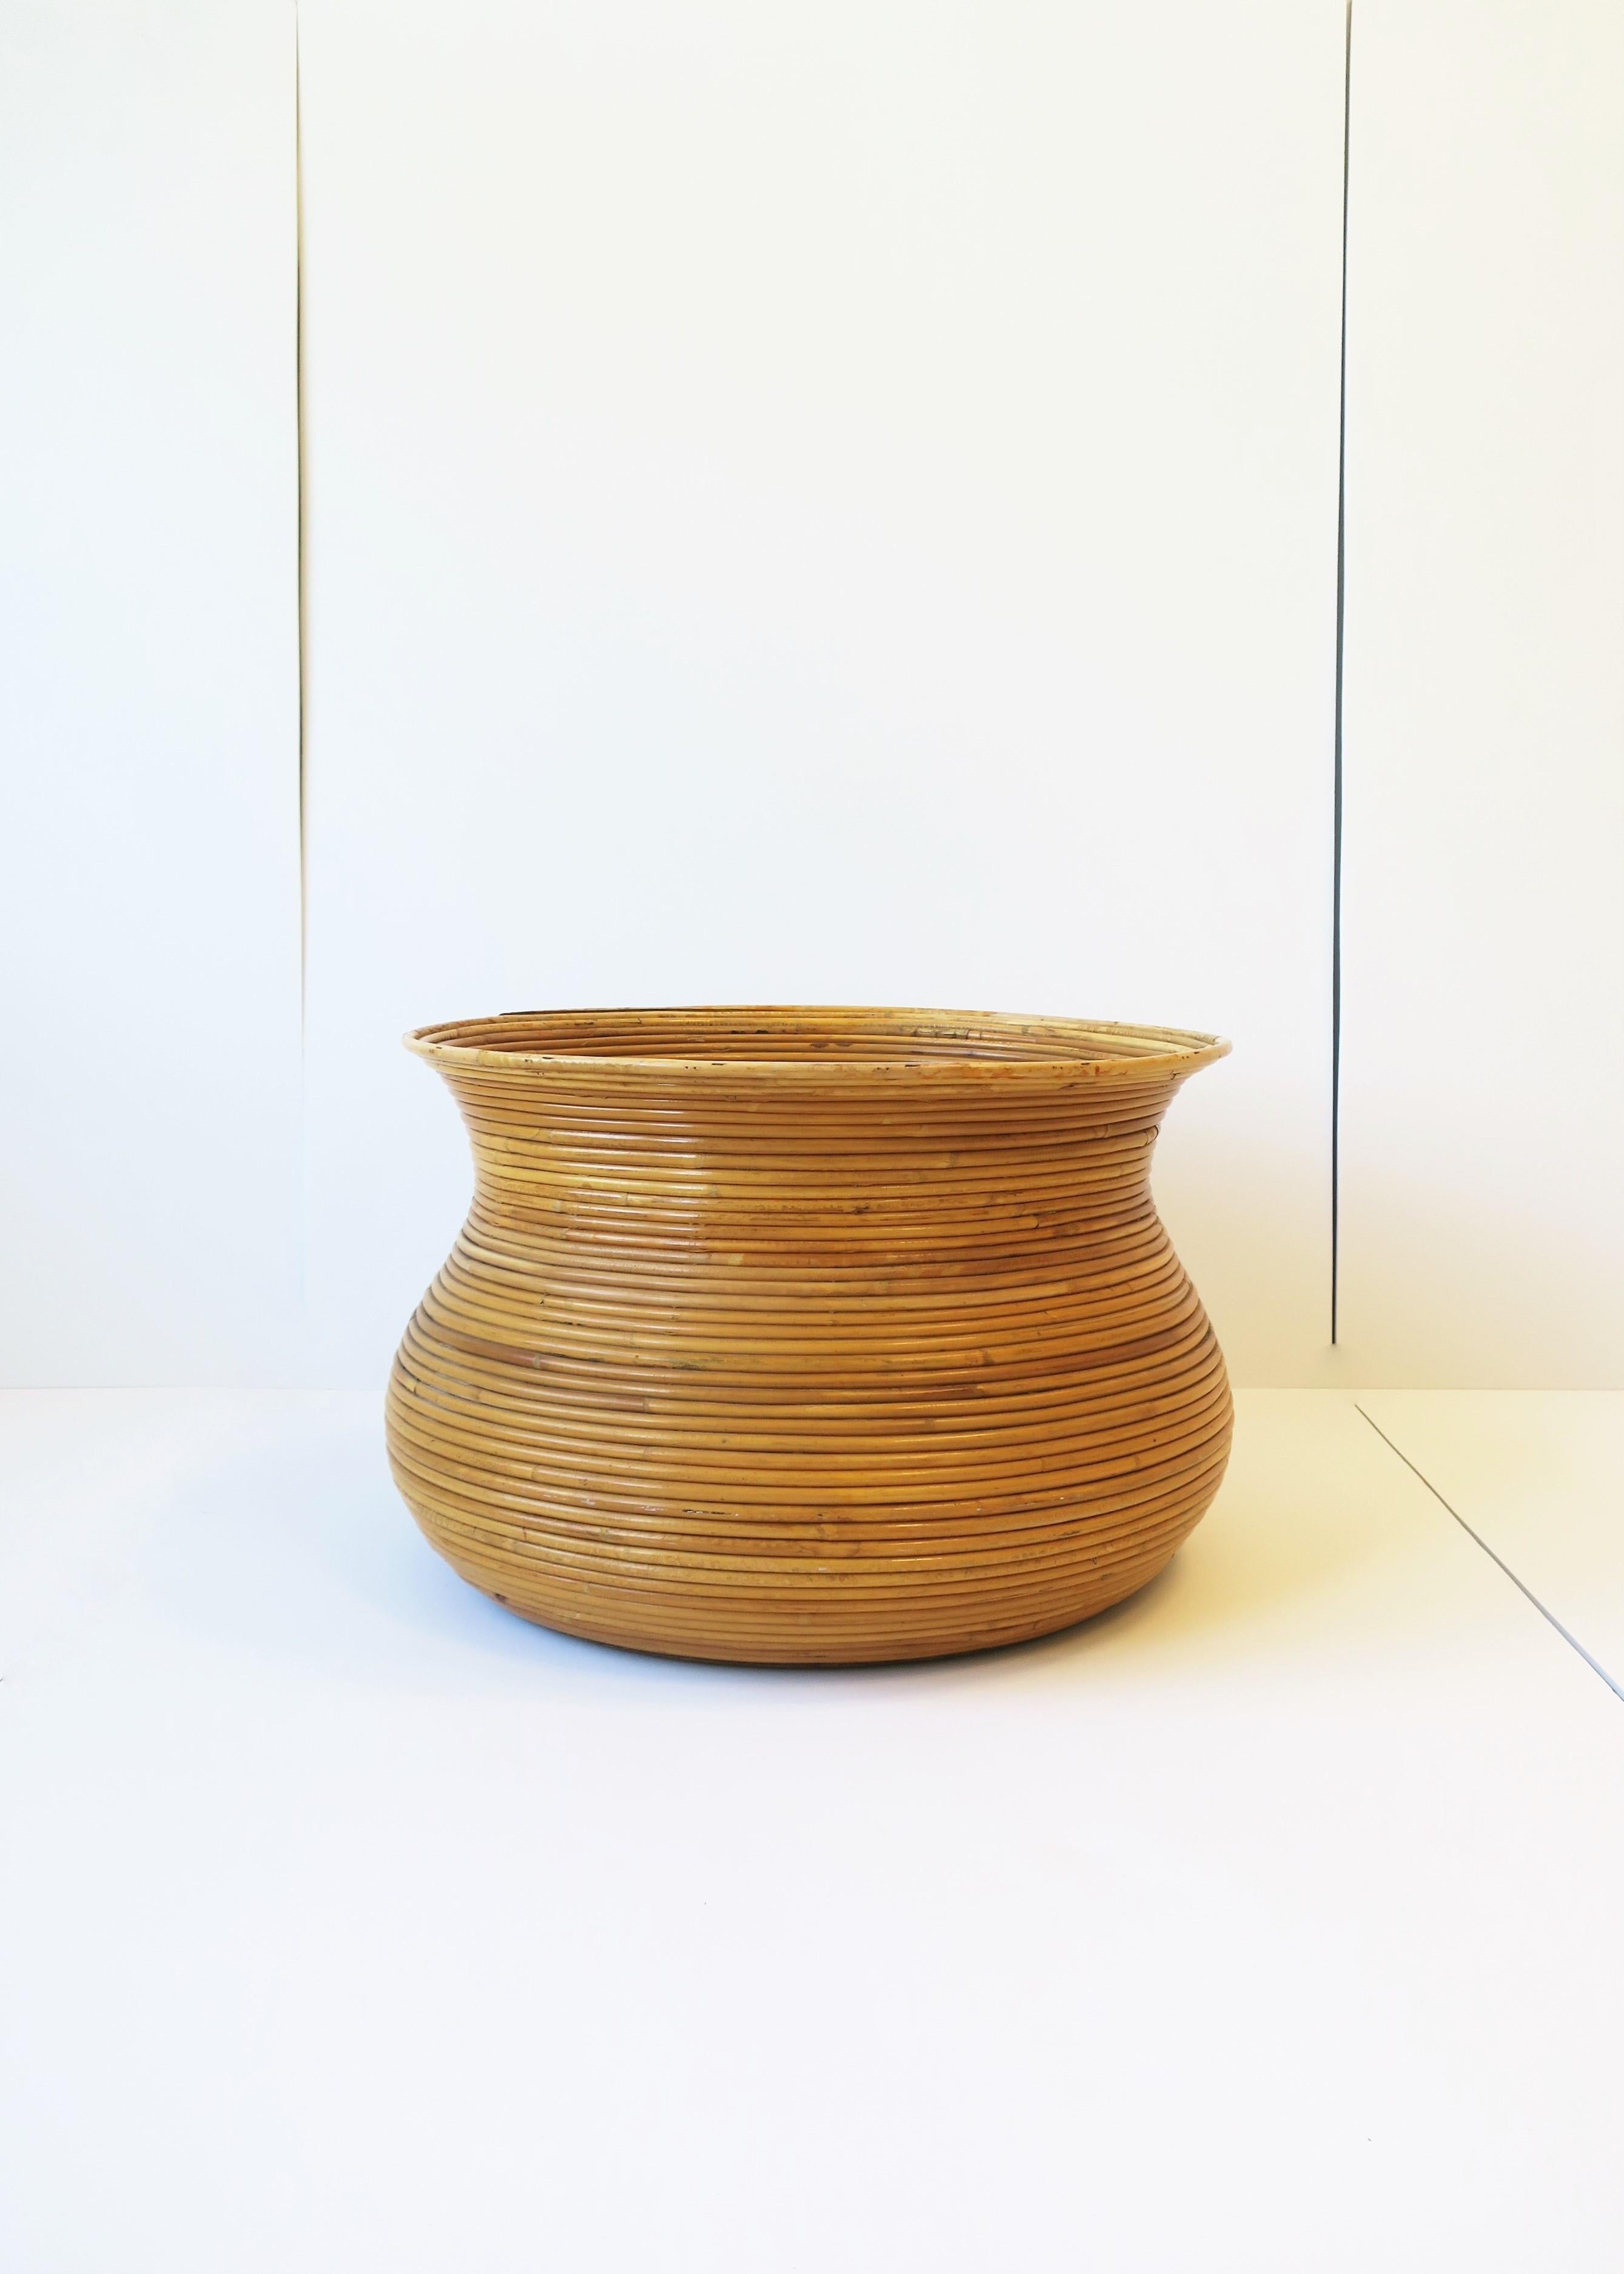 A relatively large wicker pencil reed rattan cachepot plant pot holder in the style of designer Gabriella Crespi, circa mid to late-20th century, 1970s. Overall dimensions: 11.75